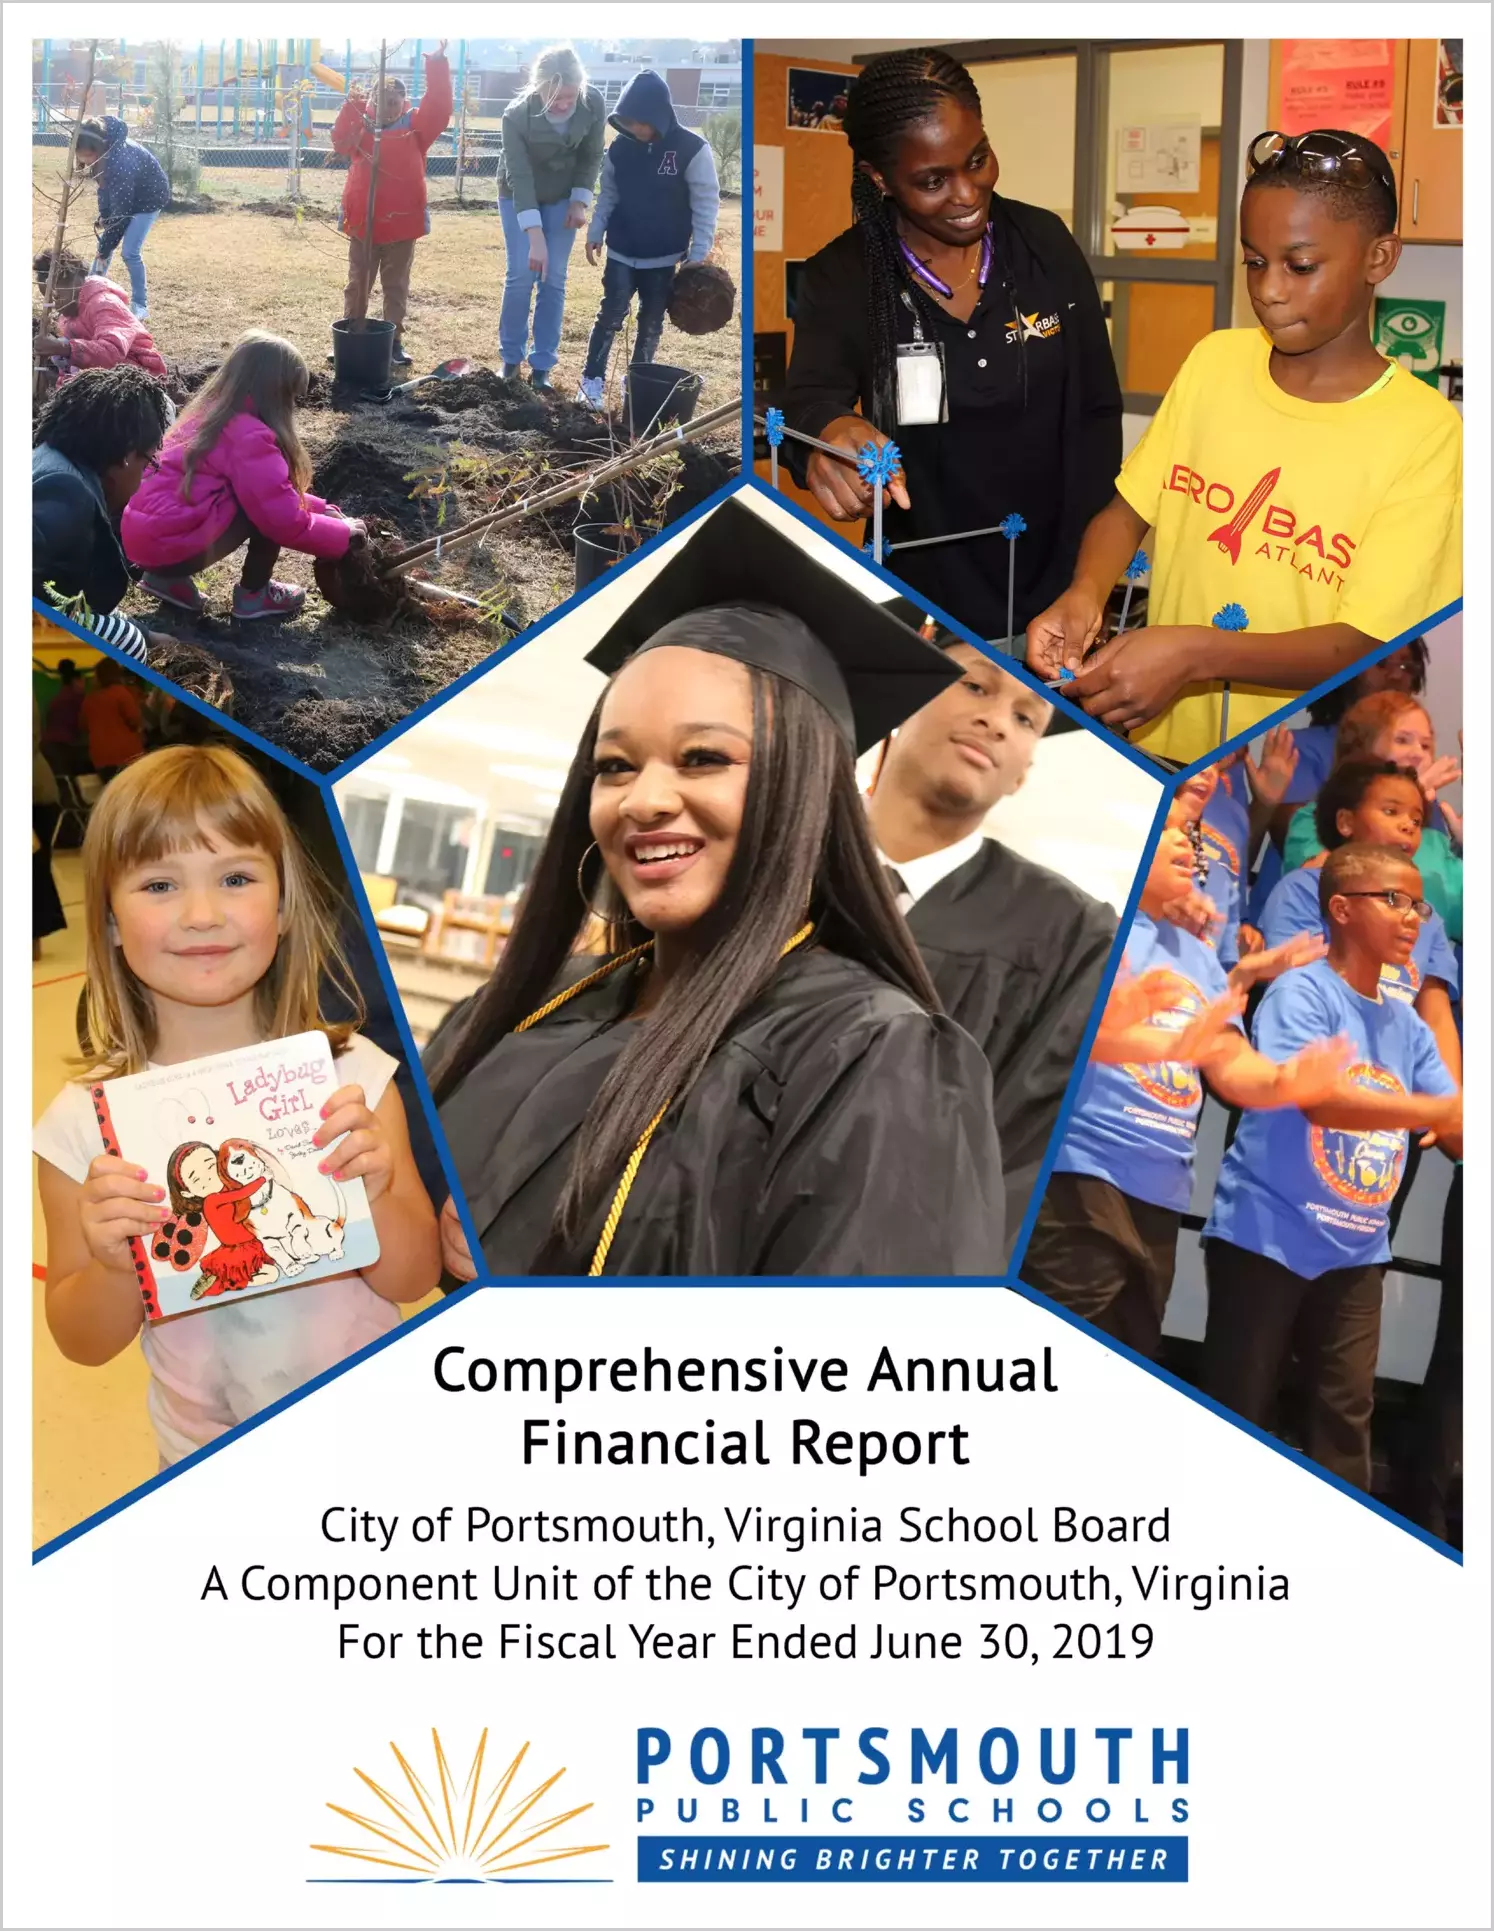 2019 Public Schools Annual Financial Report for City of Portsmouth